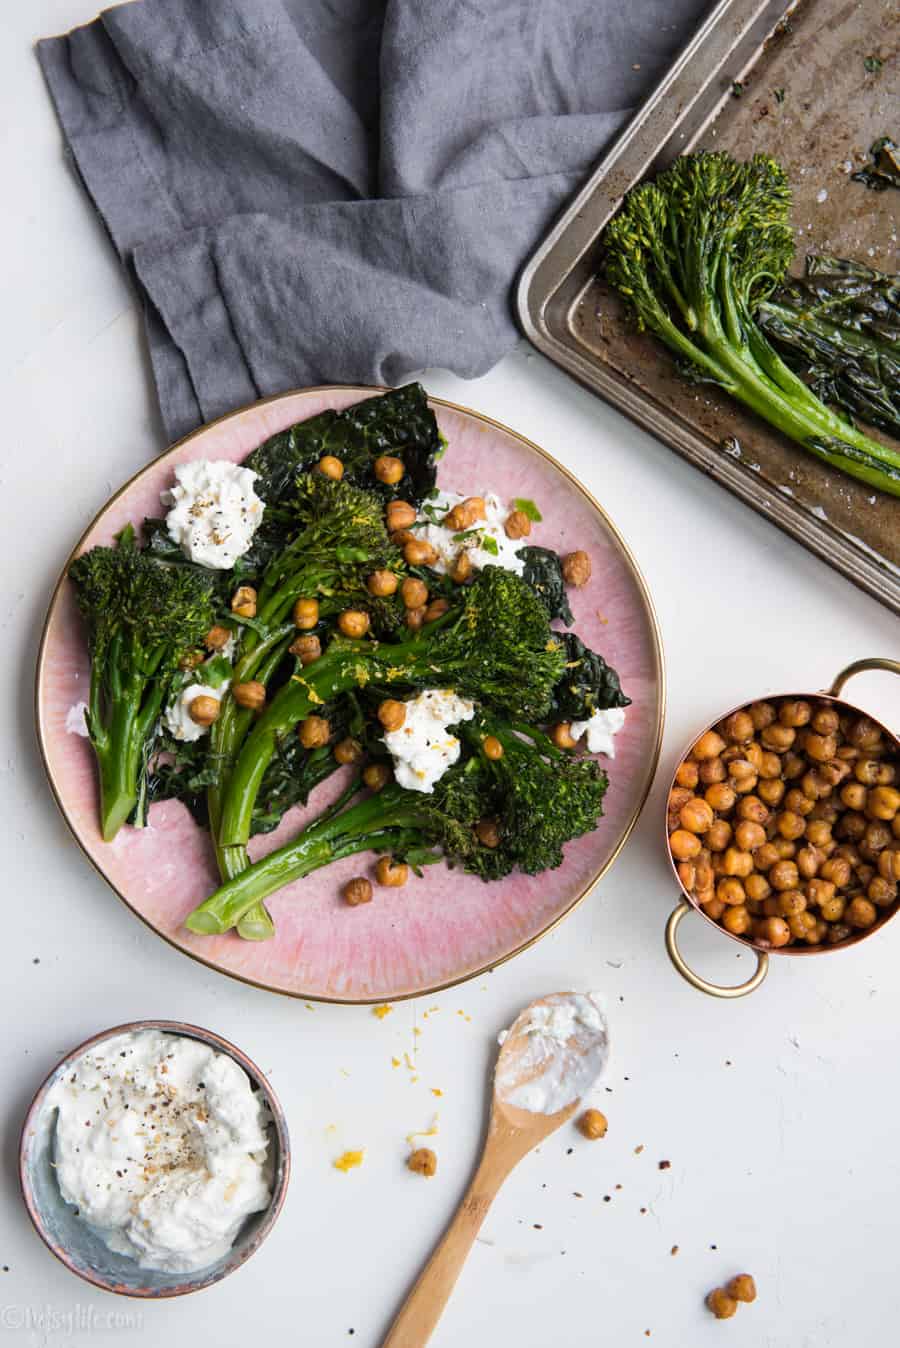 Roasted Broccolini with Crispy Kale, Chickpeas and Burrata on a pink plate next to a roasting pan, a gray linen, a measuring cup filled with chickpeas and a metal dish filled with cheese next to a wooden spoon